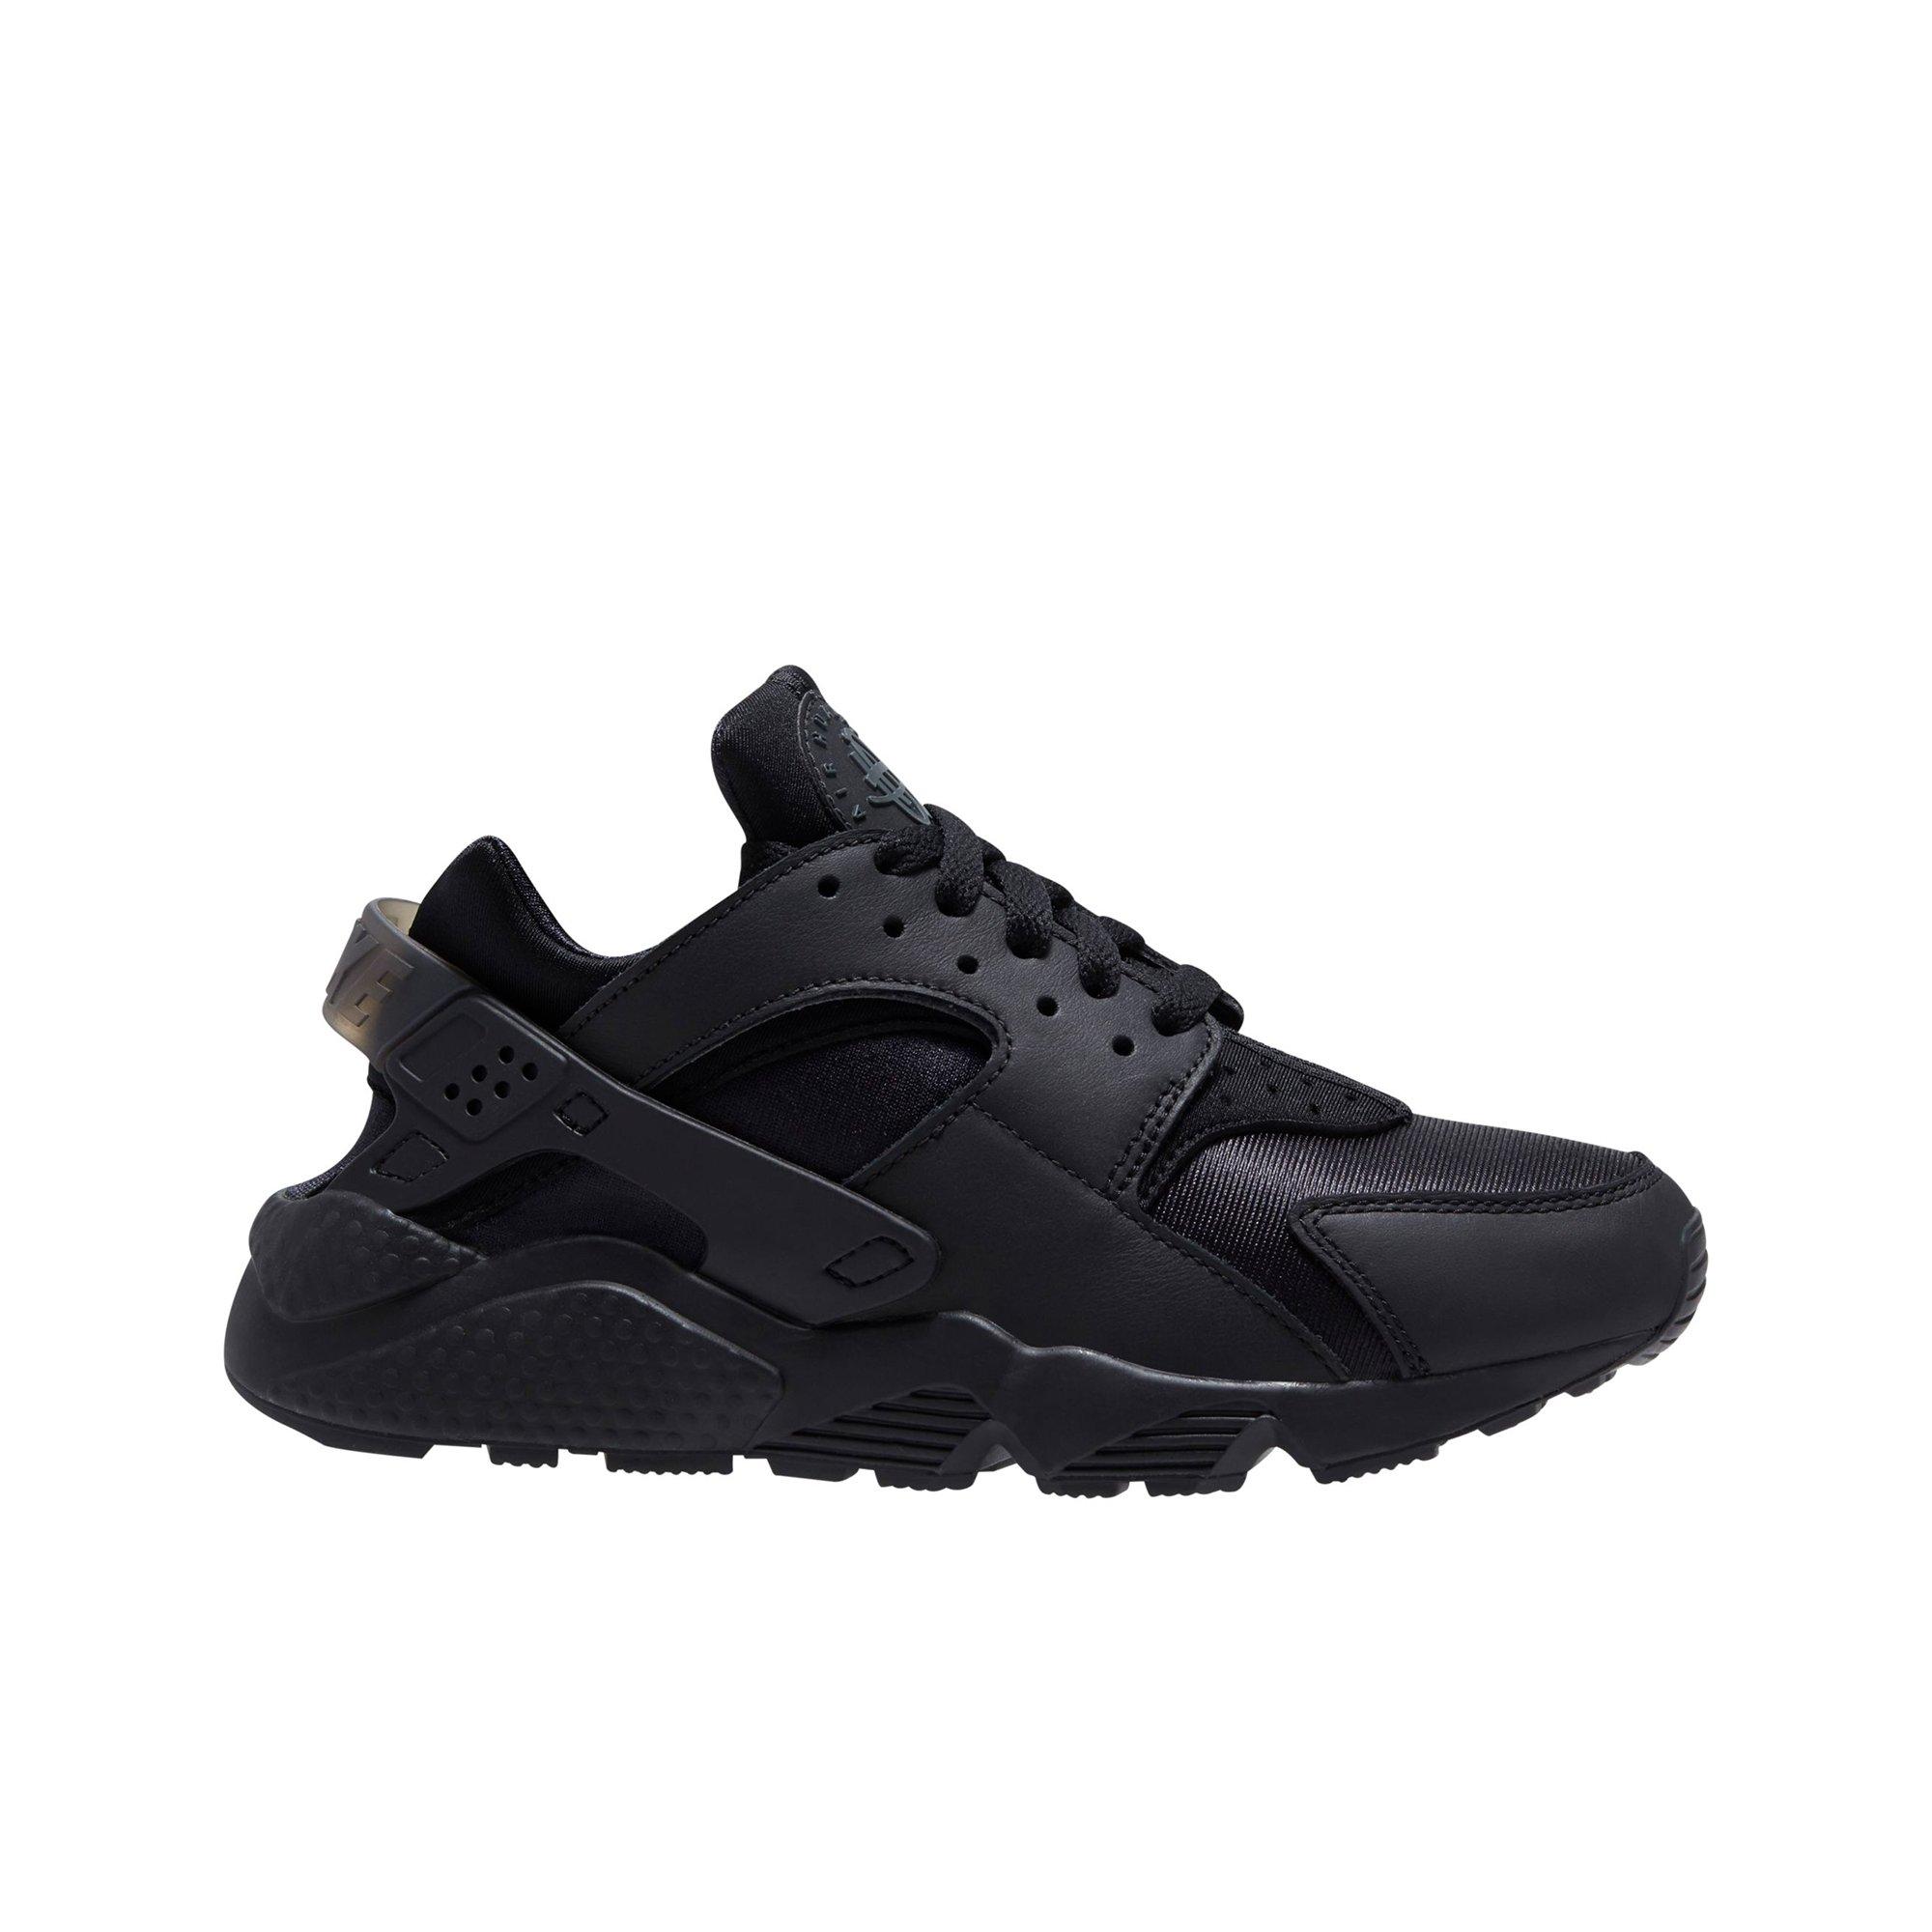 outfits with black huaraches